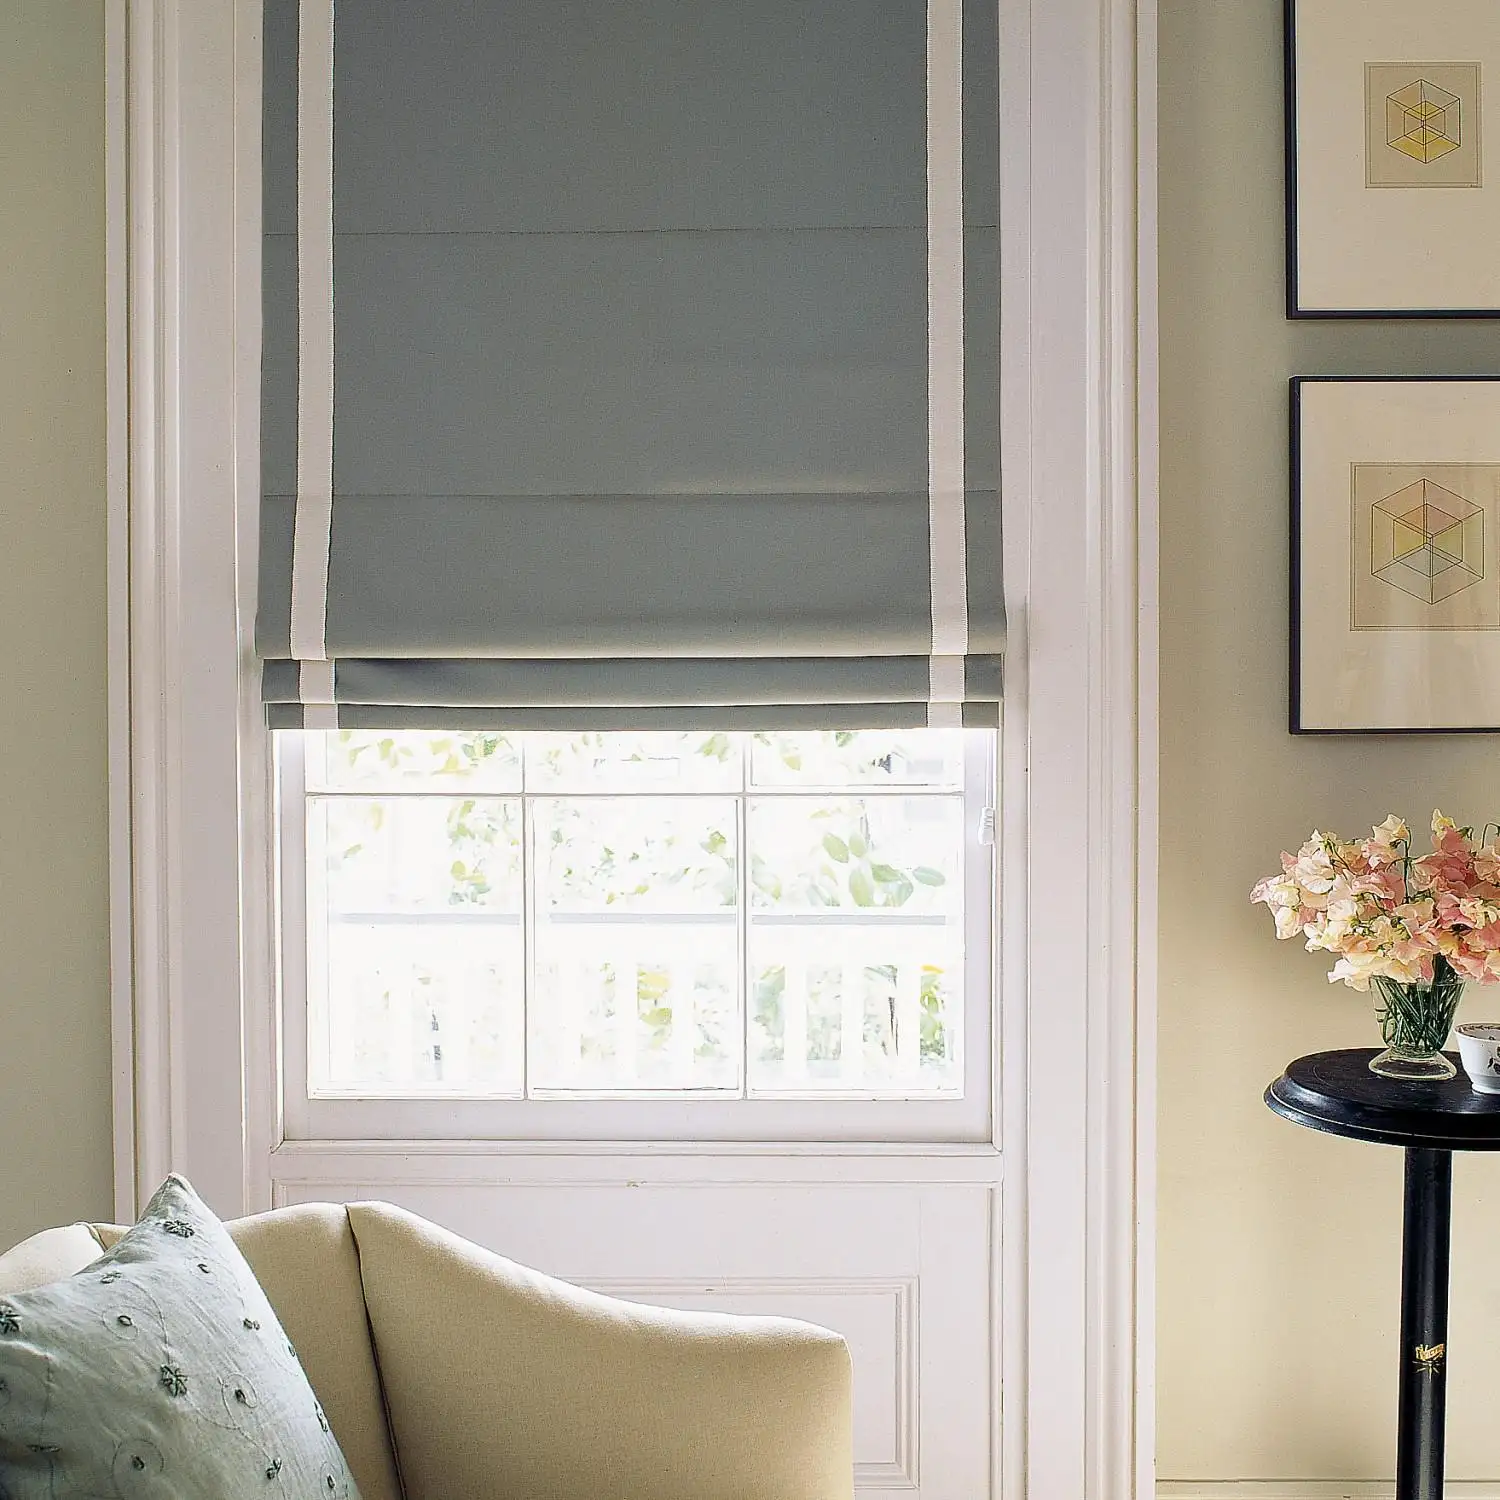 Roman shades with banding